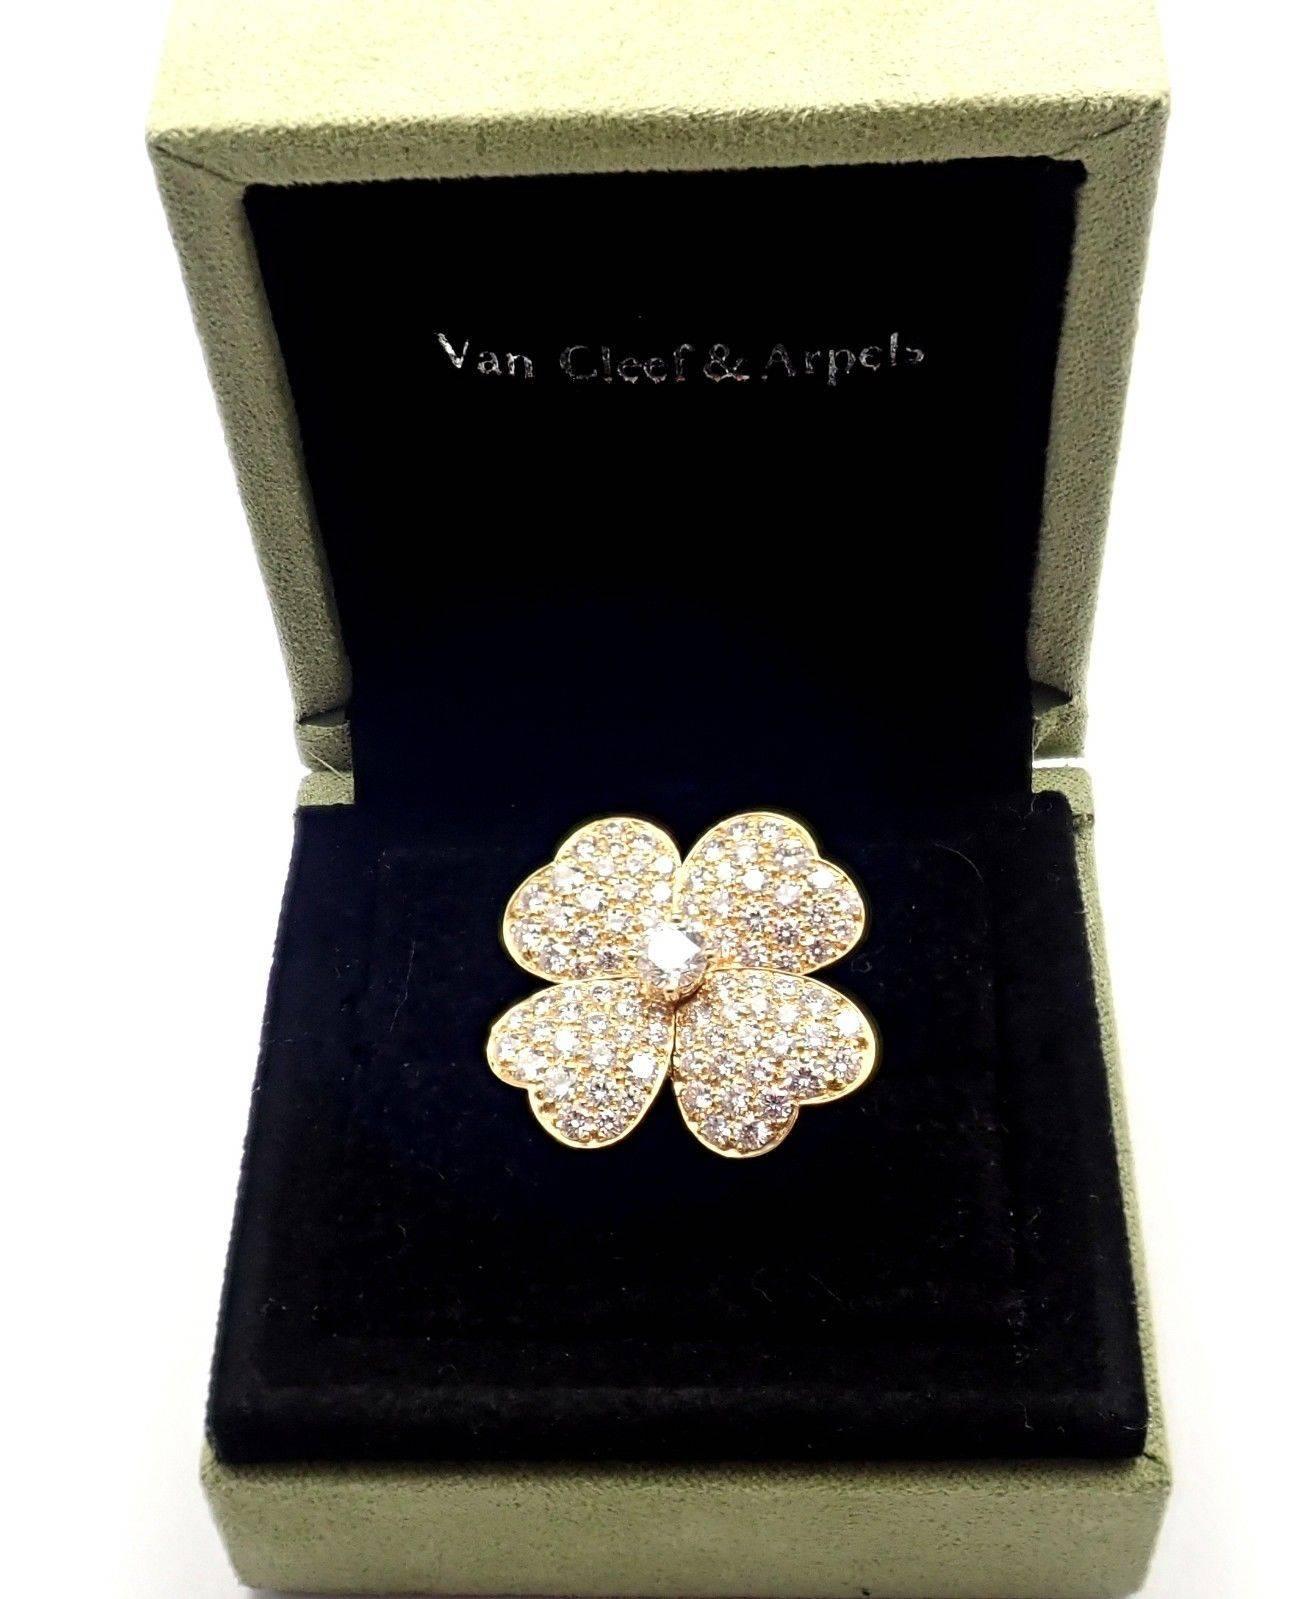 18k Yellow Gold Diamond Large Model Cosmos Ring by Van Cleef & Arpels.
With Round brilliant cut diamonds VVS1 clarity, E color total weight approx. 3.25ct
This ring comes with Van Cleef & Arpels box and Van Cleef & Arpels service paper from 
VCA